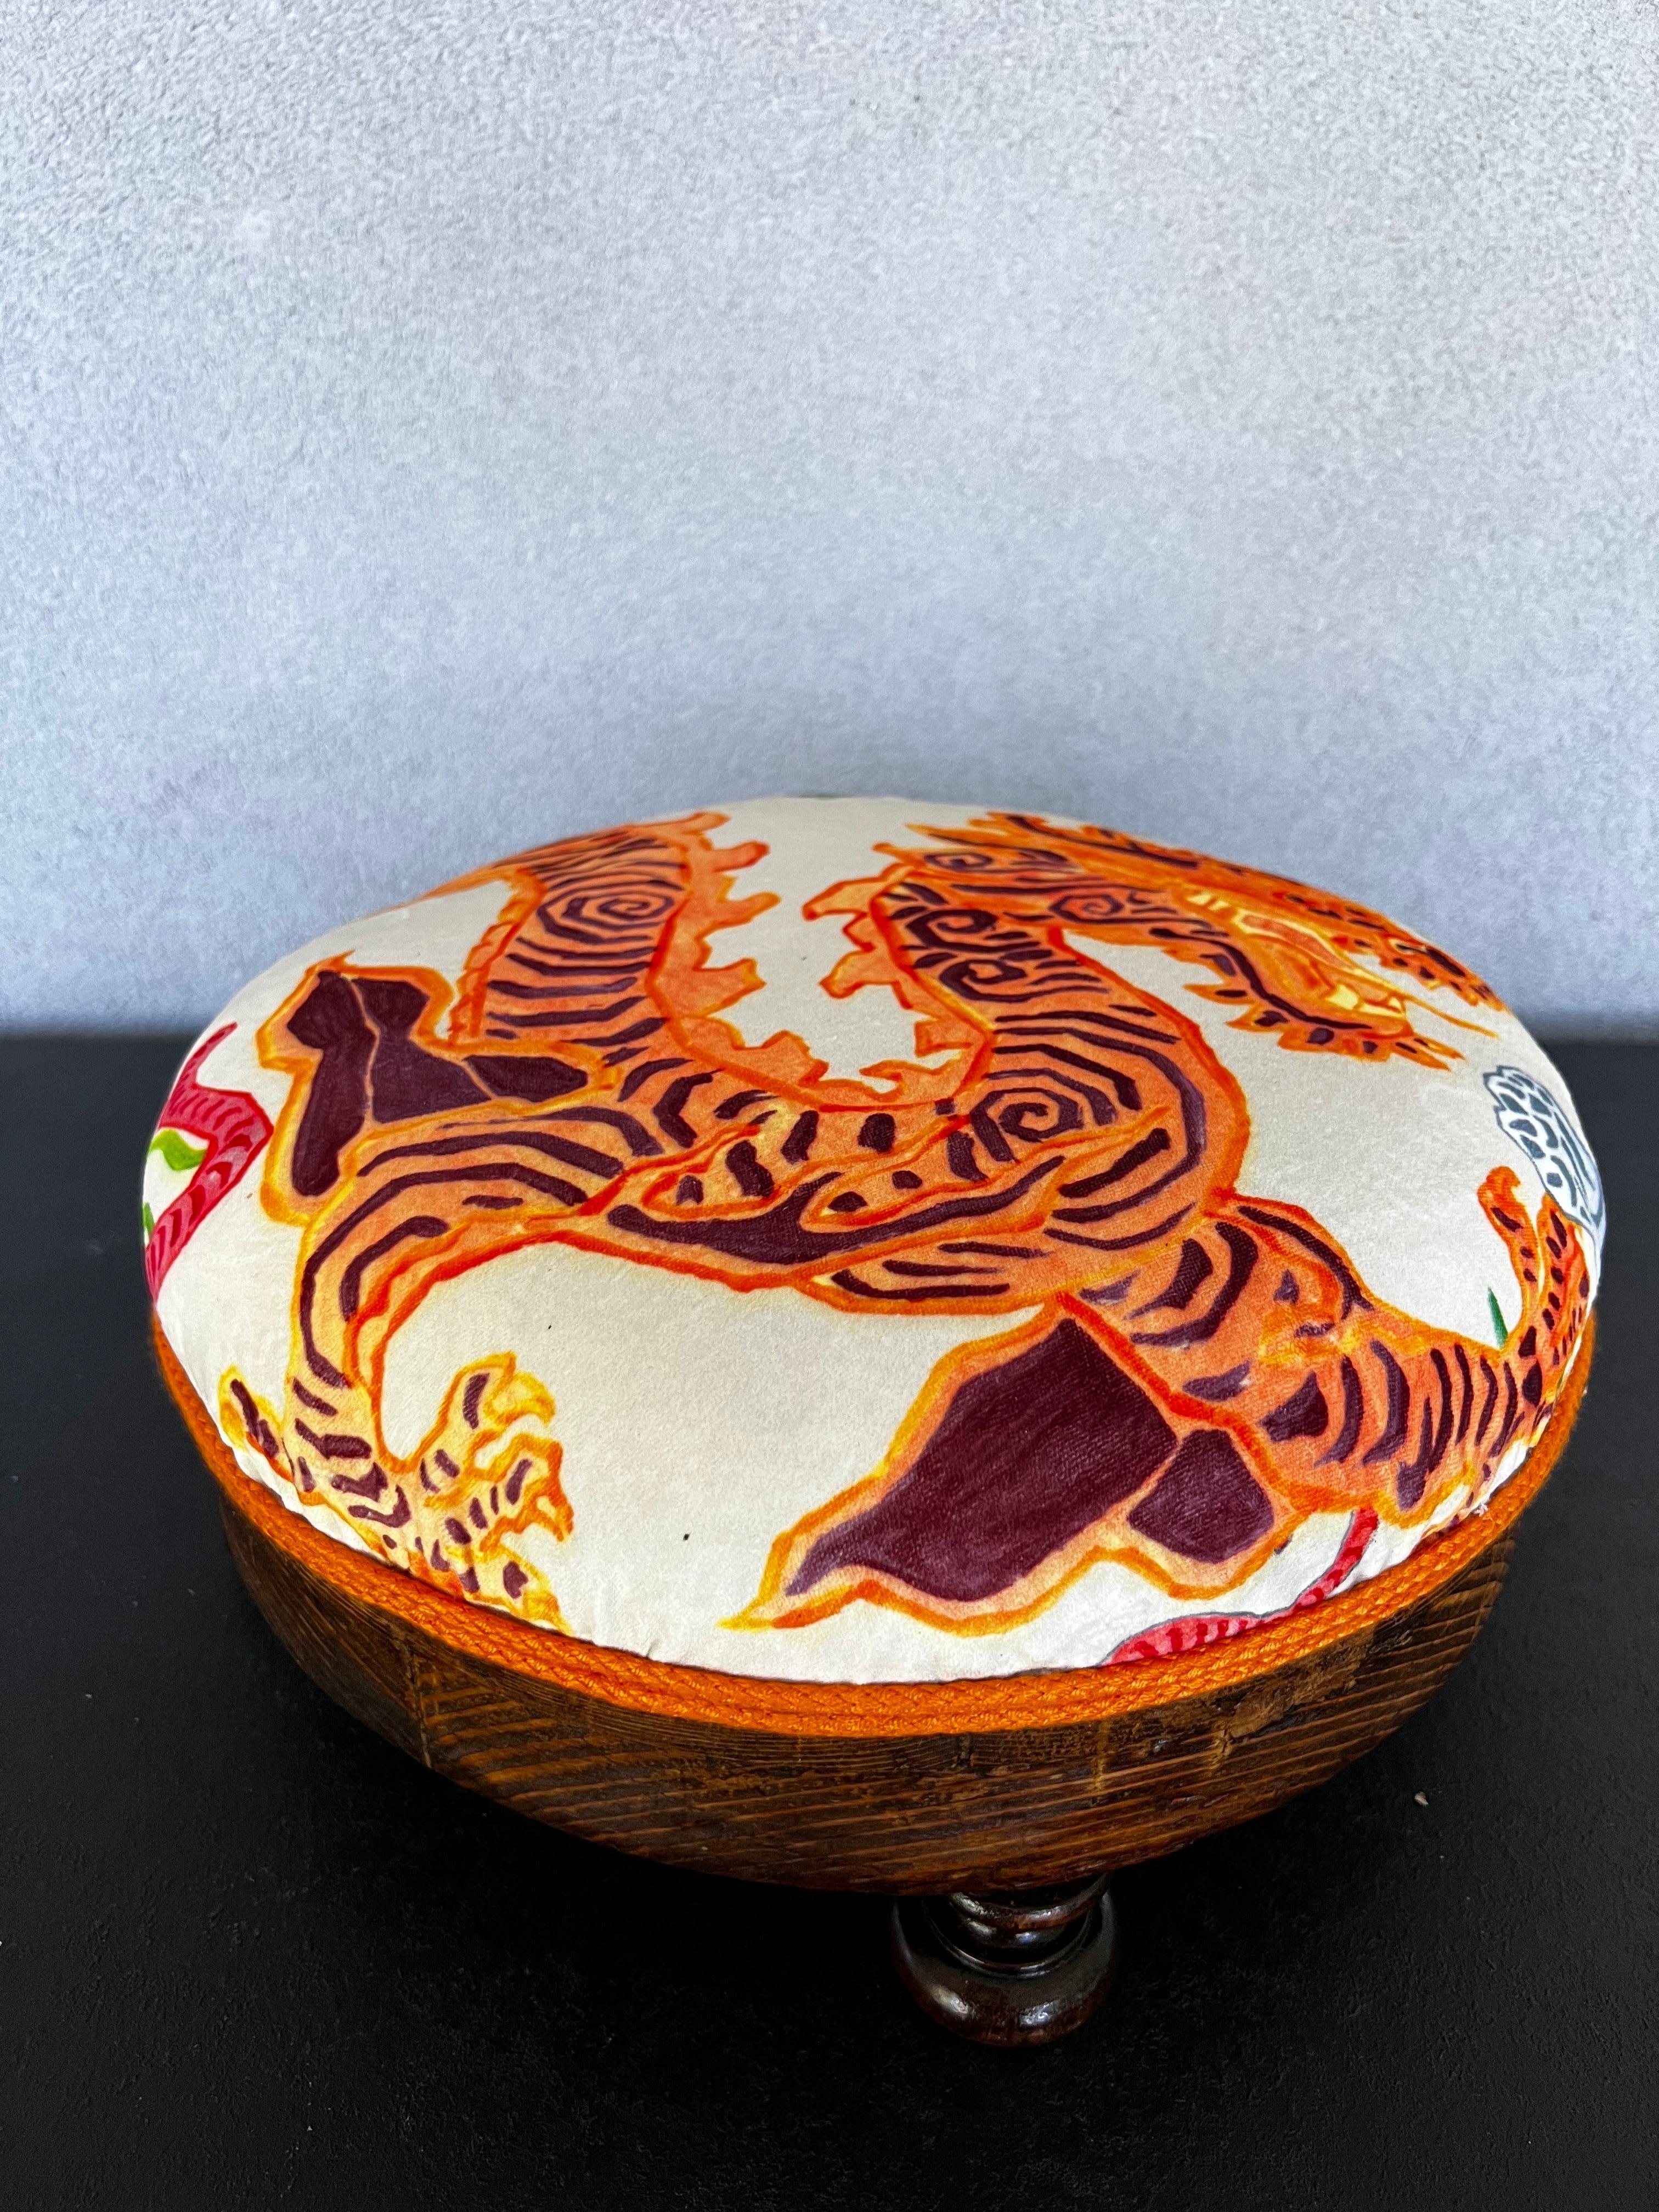 Gorgeous antique footstool that has been fully refinished preserving the original look of the frame,upholstered with an Asian theme velvet with a beautiful dragon in shades of orange with an off white background that gives the perfect contrast